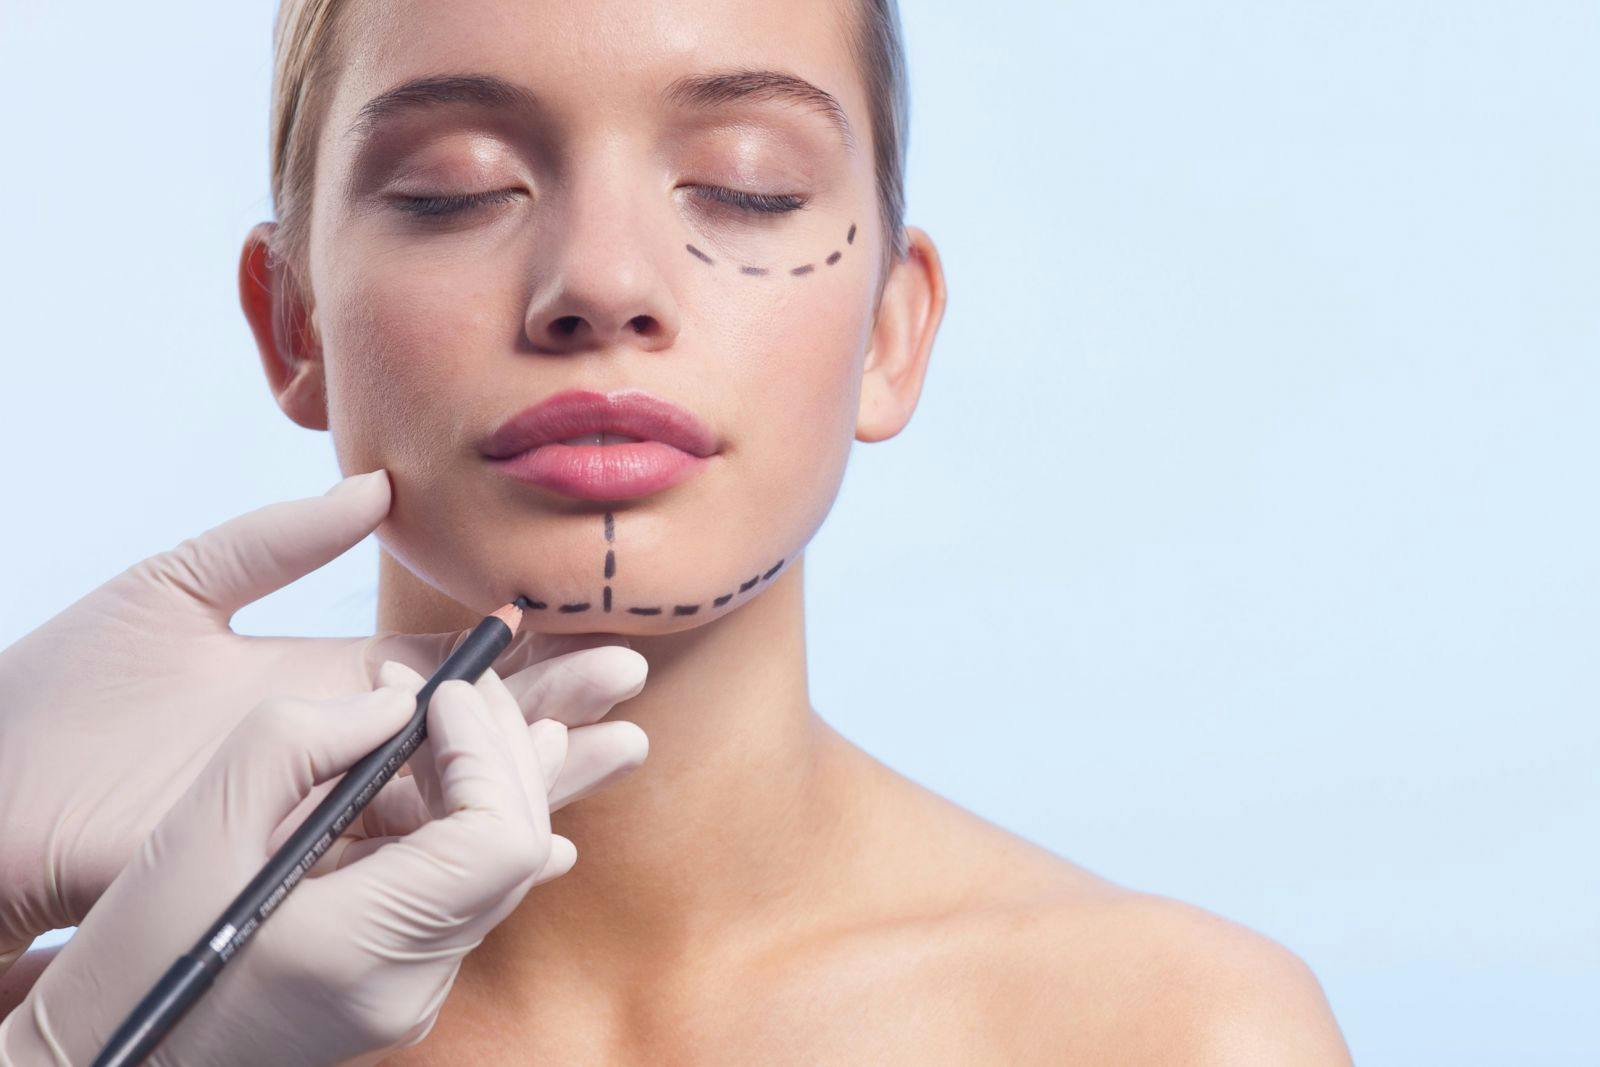 Plastic Surgery Procedures Fluctuate with the Economy